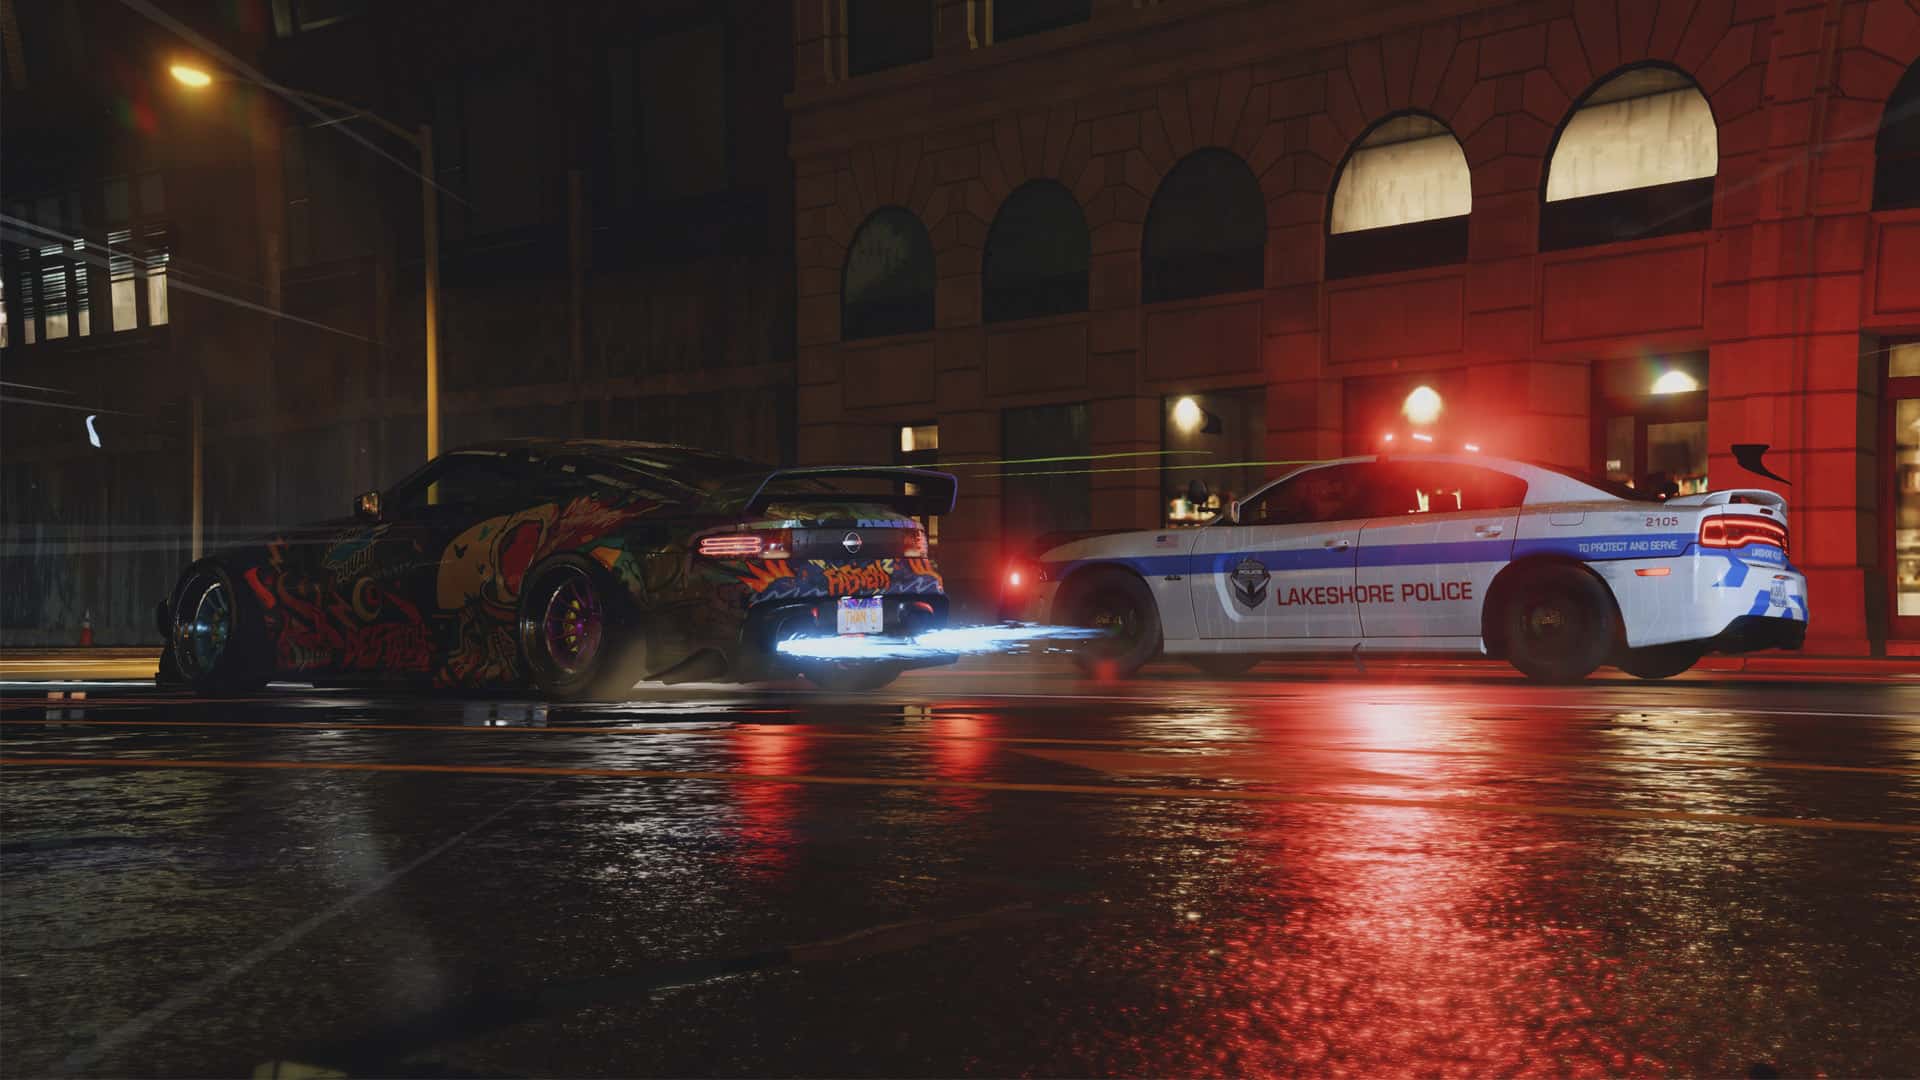 A Night Of Need For Speed Photos